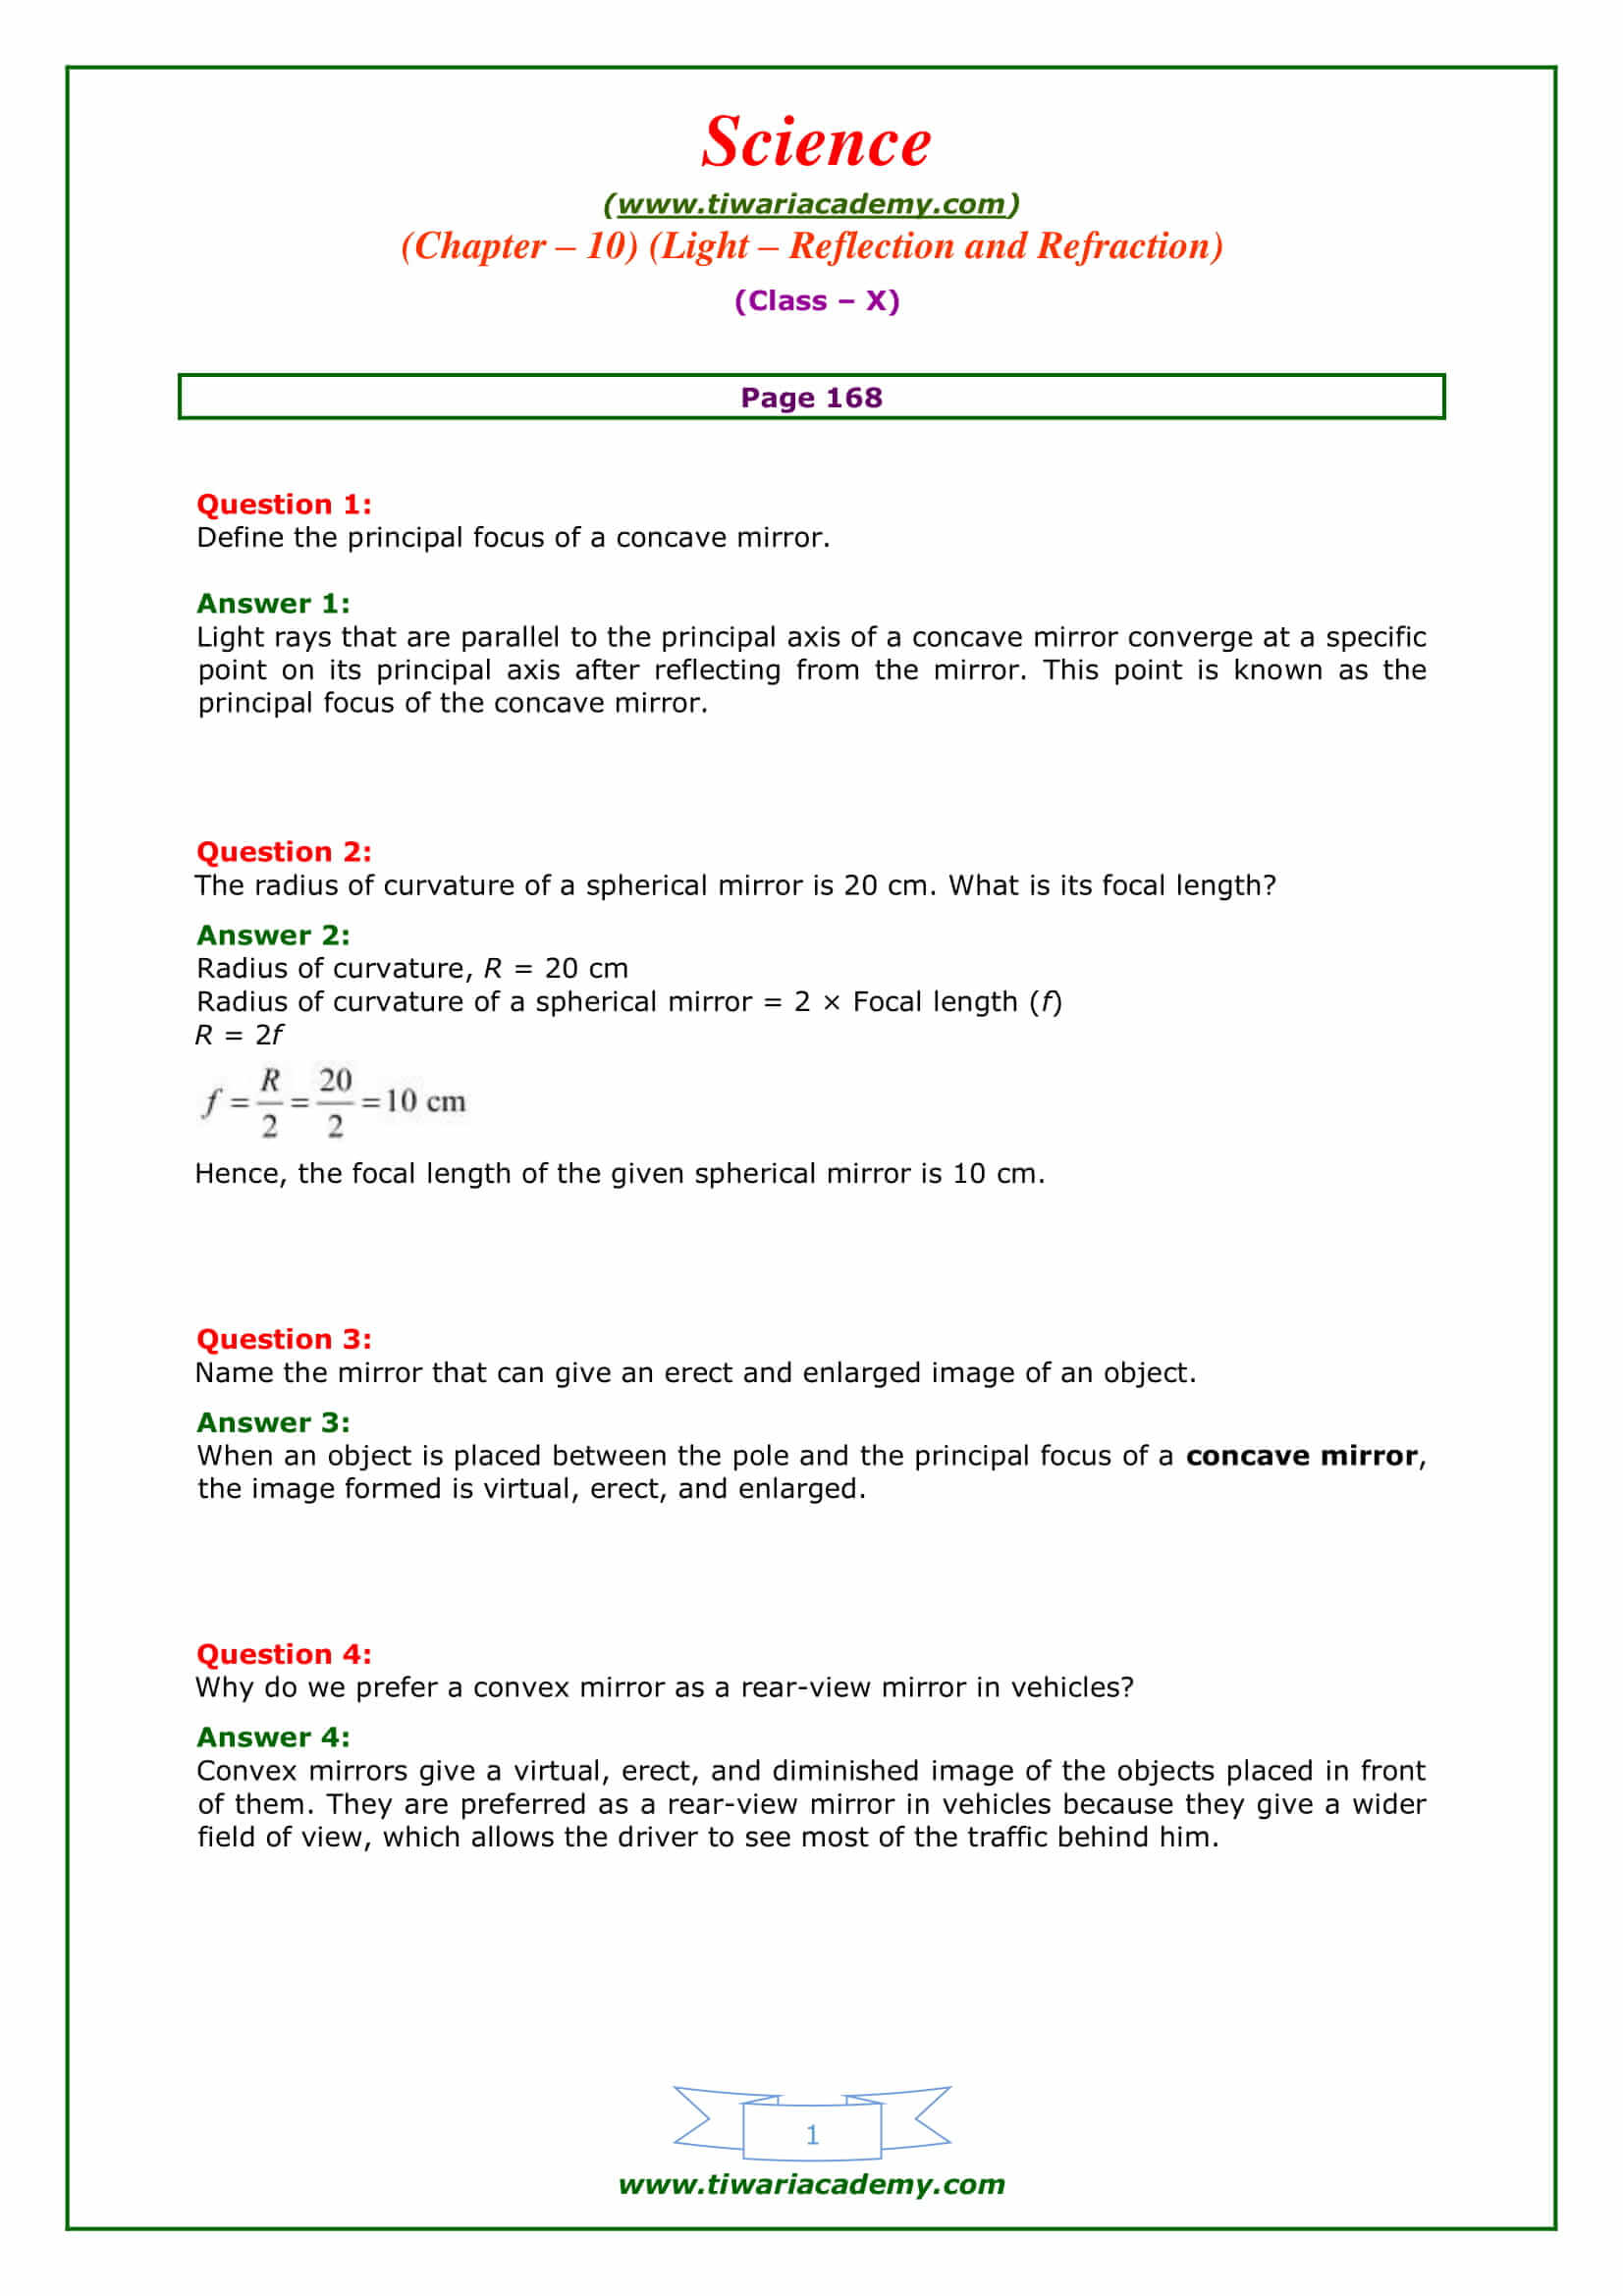 NCERT Solutions for Class 10 Science Chapter 10 Intext questions on page 168